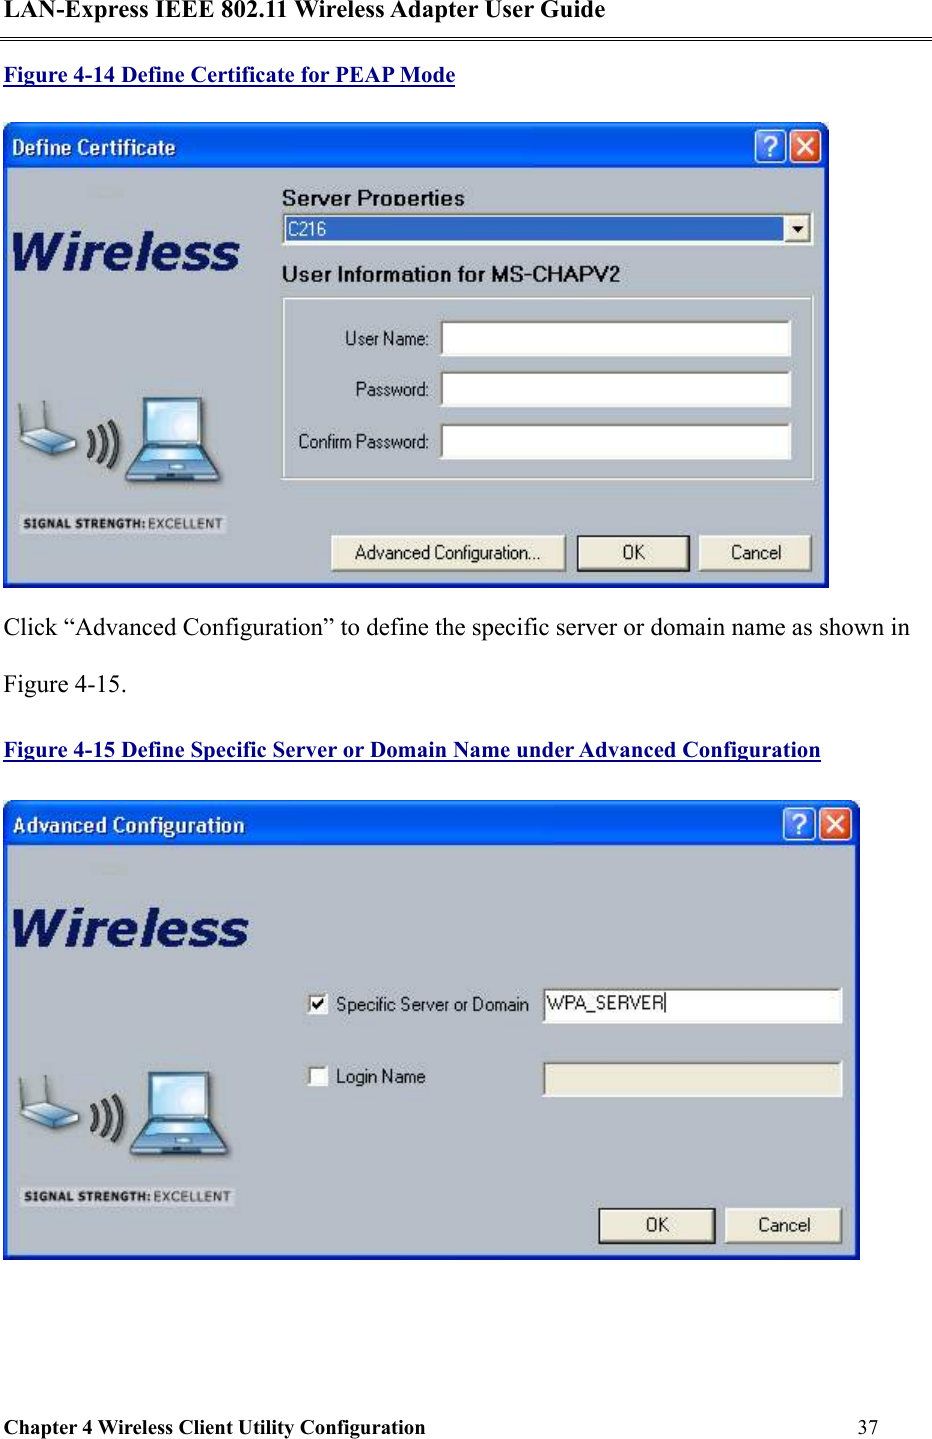 LAN-Express IEEE 802.11 Wireless Adapter User Guide Chapter 4 Wireless Client Utility Configuration   37  Figure 4-14 Define Certificate for PEAP Mode  Click “Advanced Configuration” to define the specific server or domain name as shown in Figure 4-15. Figure 4-15 Define Specific Server or Domain Name under Advanced Configuration  